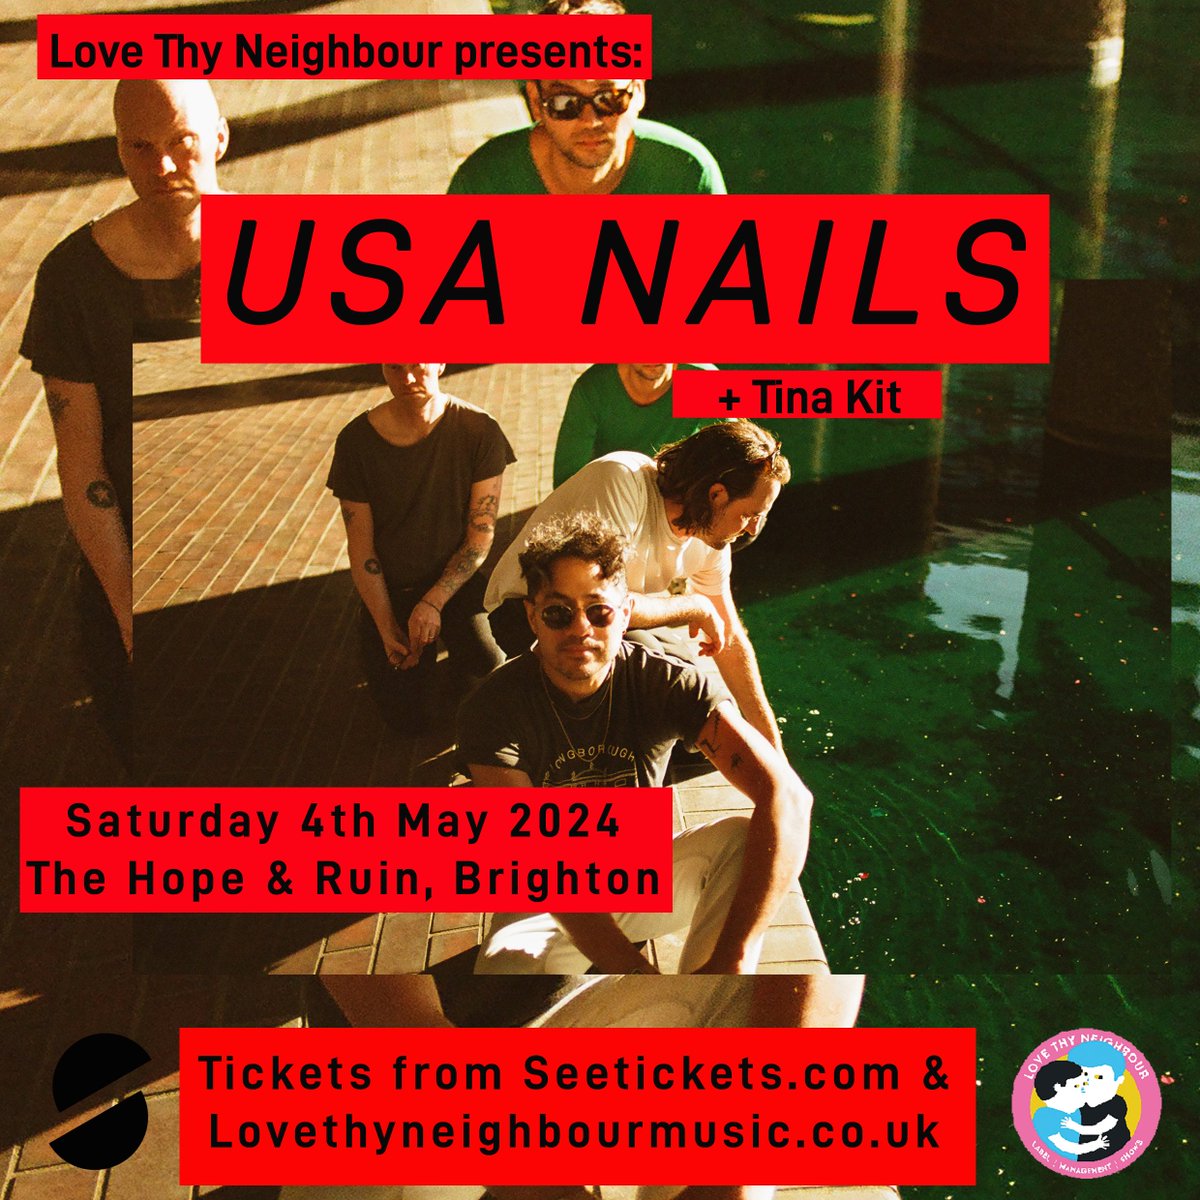 ♠️ Wirey post-rock band Tina Kit will be supporting USA Nails! 📆 4th May 🏫 @thehopeandruin 🎟 lovethyneighbourmusic.co.uk/event/usa-nails